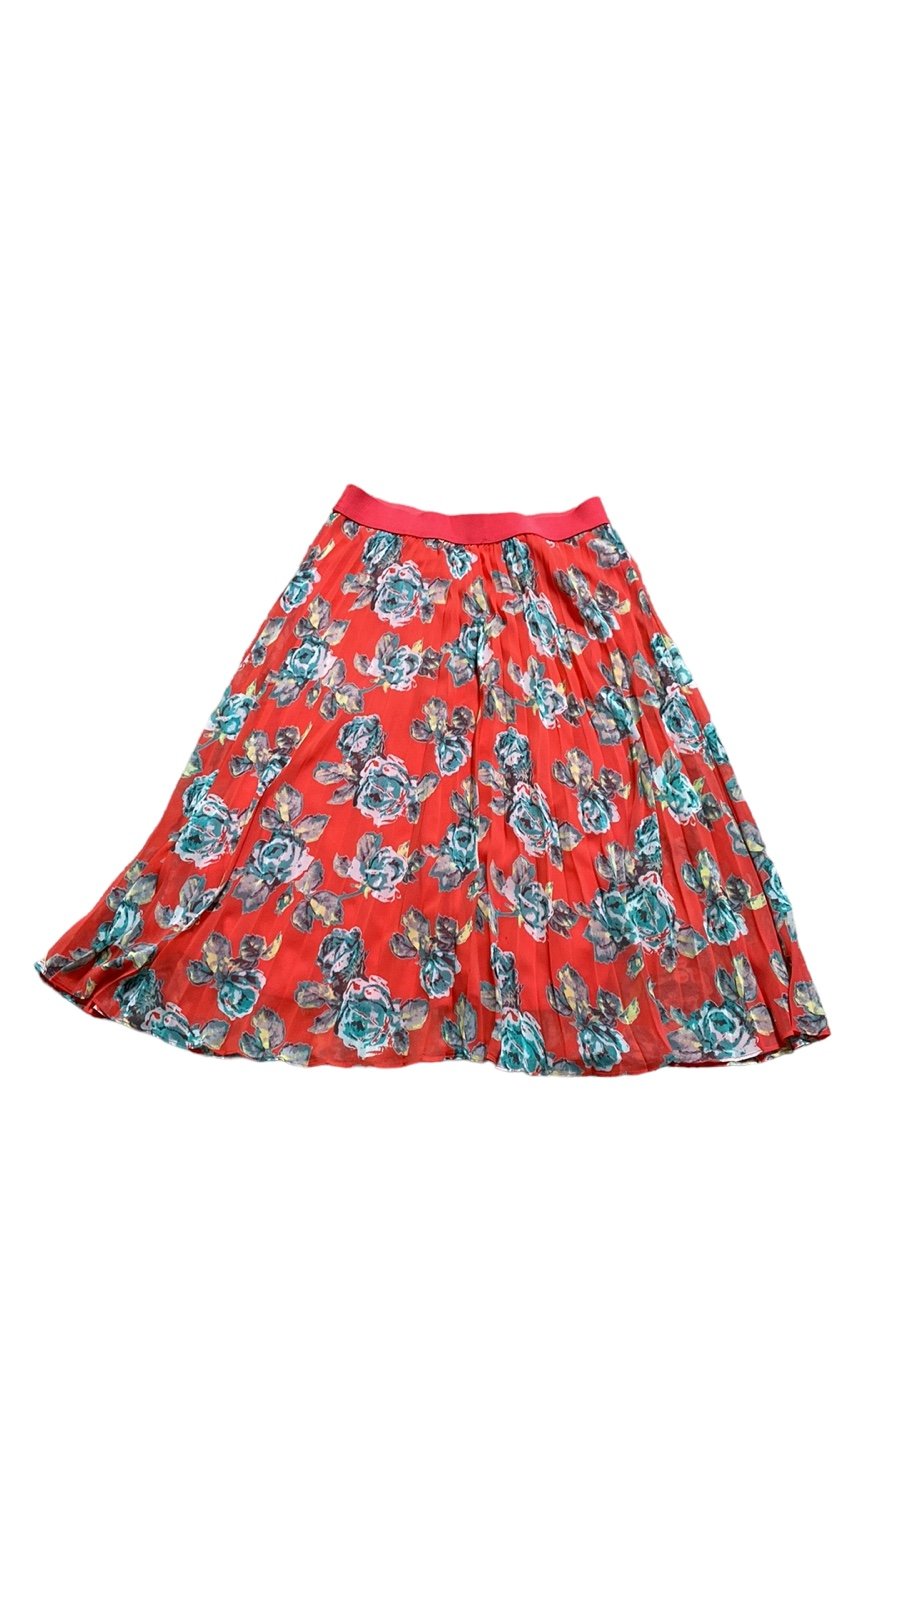 Personality Soprano Red Floral Pleated Midi Skirt oxdNrm3Kz just buy it